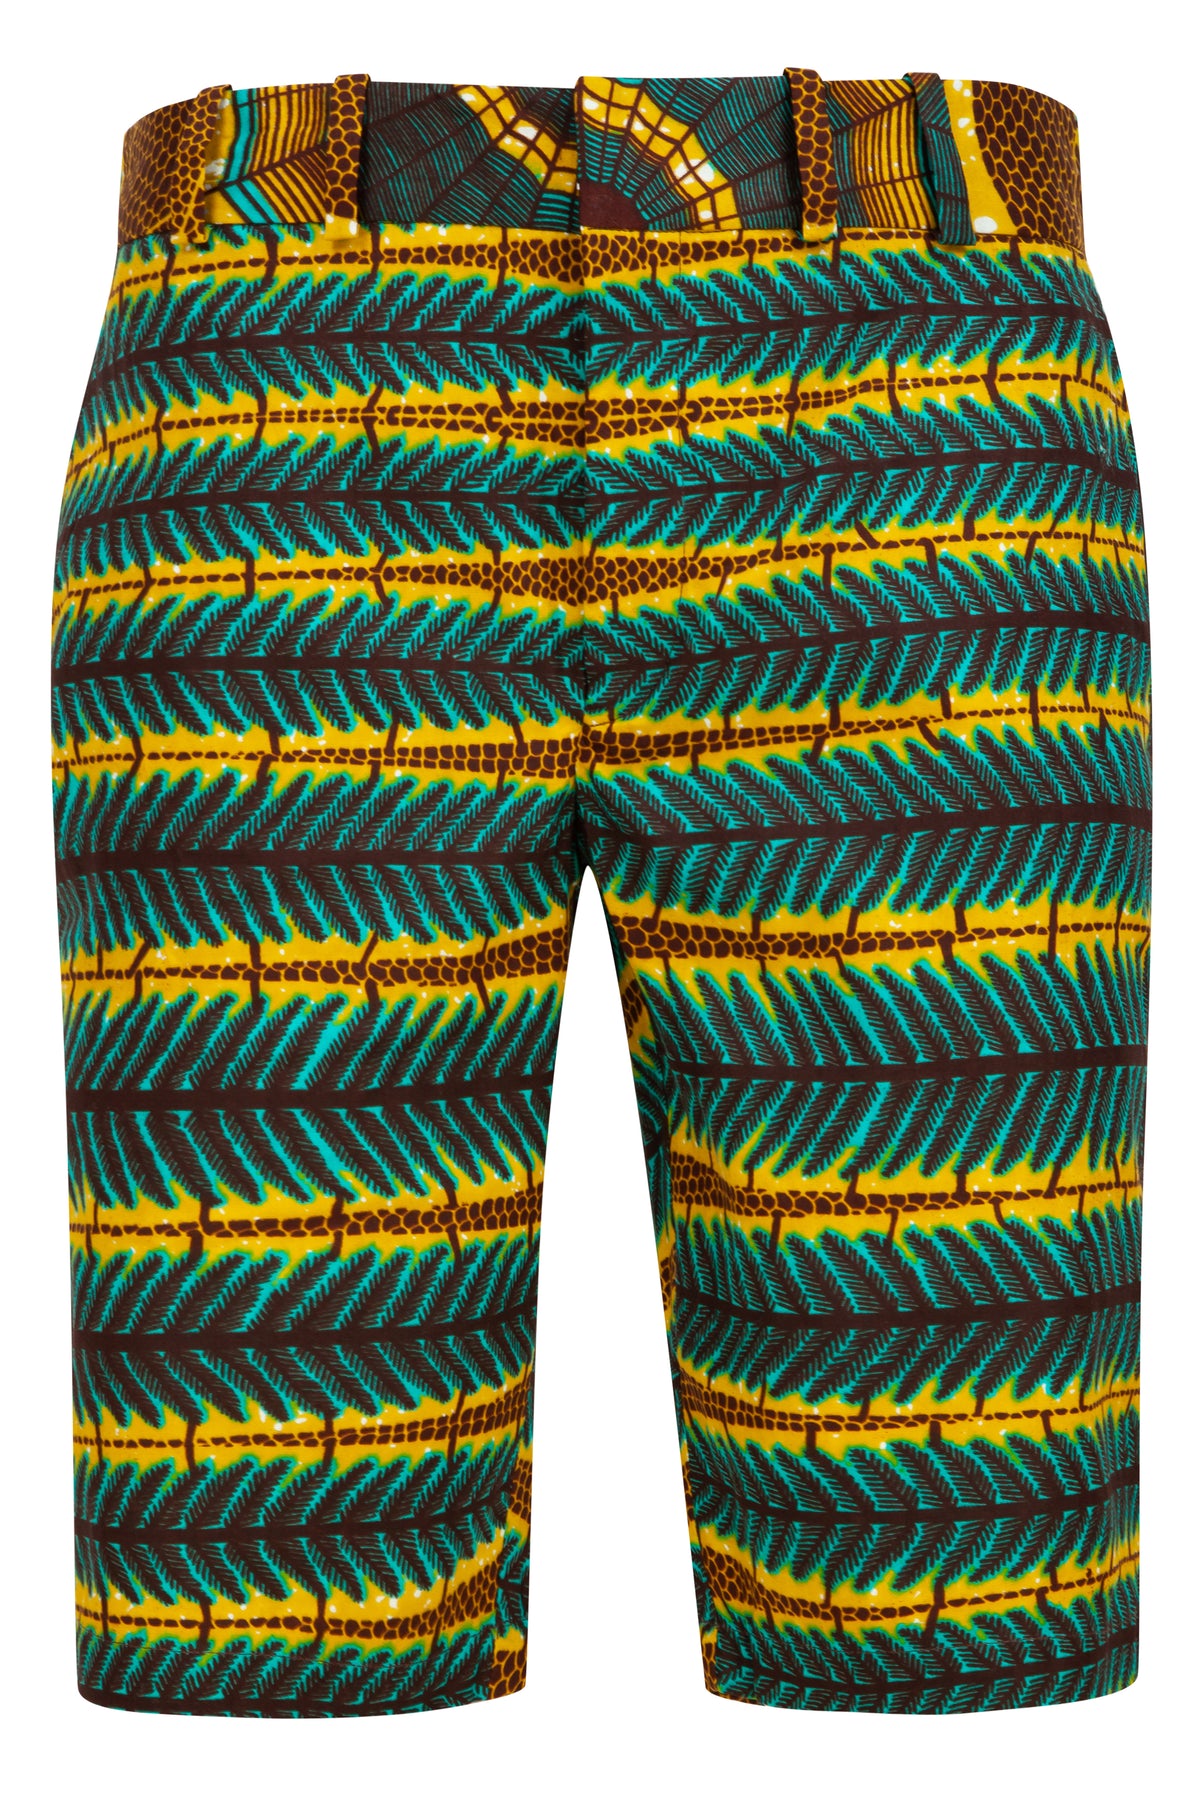 Men's African print fitted shorts-Love Web - OHEMA OHENE AFRICAN INSPIRED FASHION